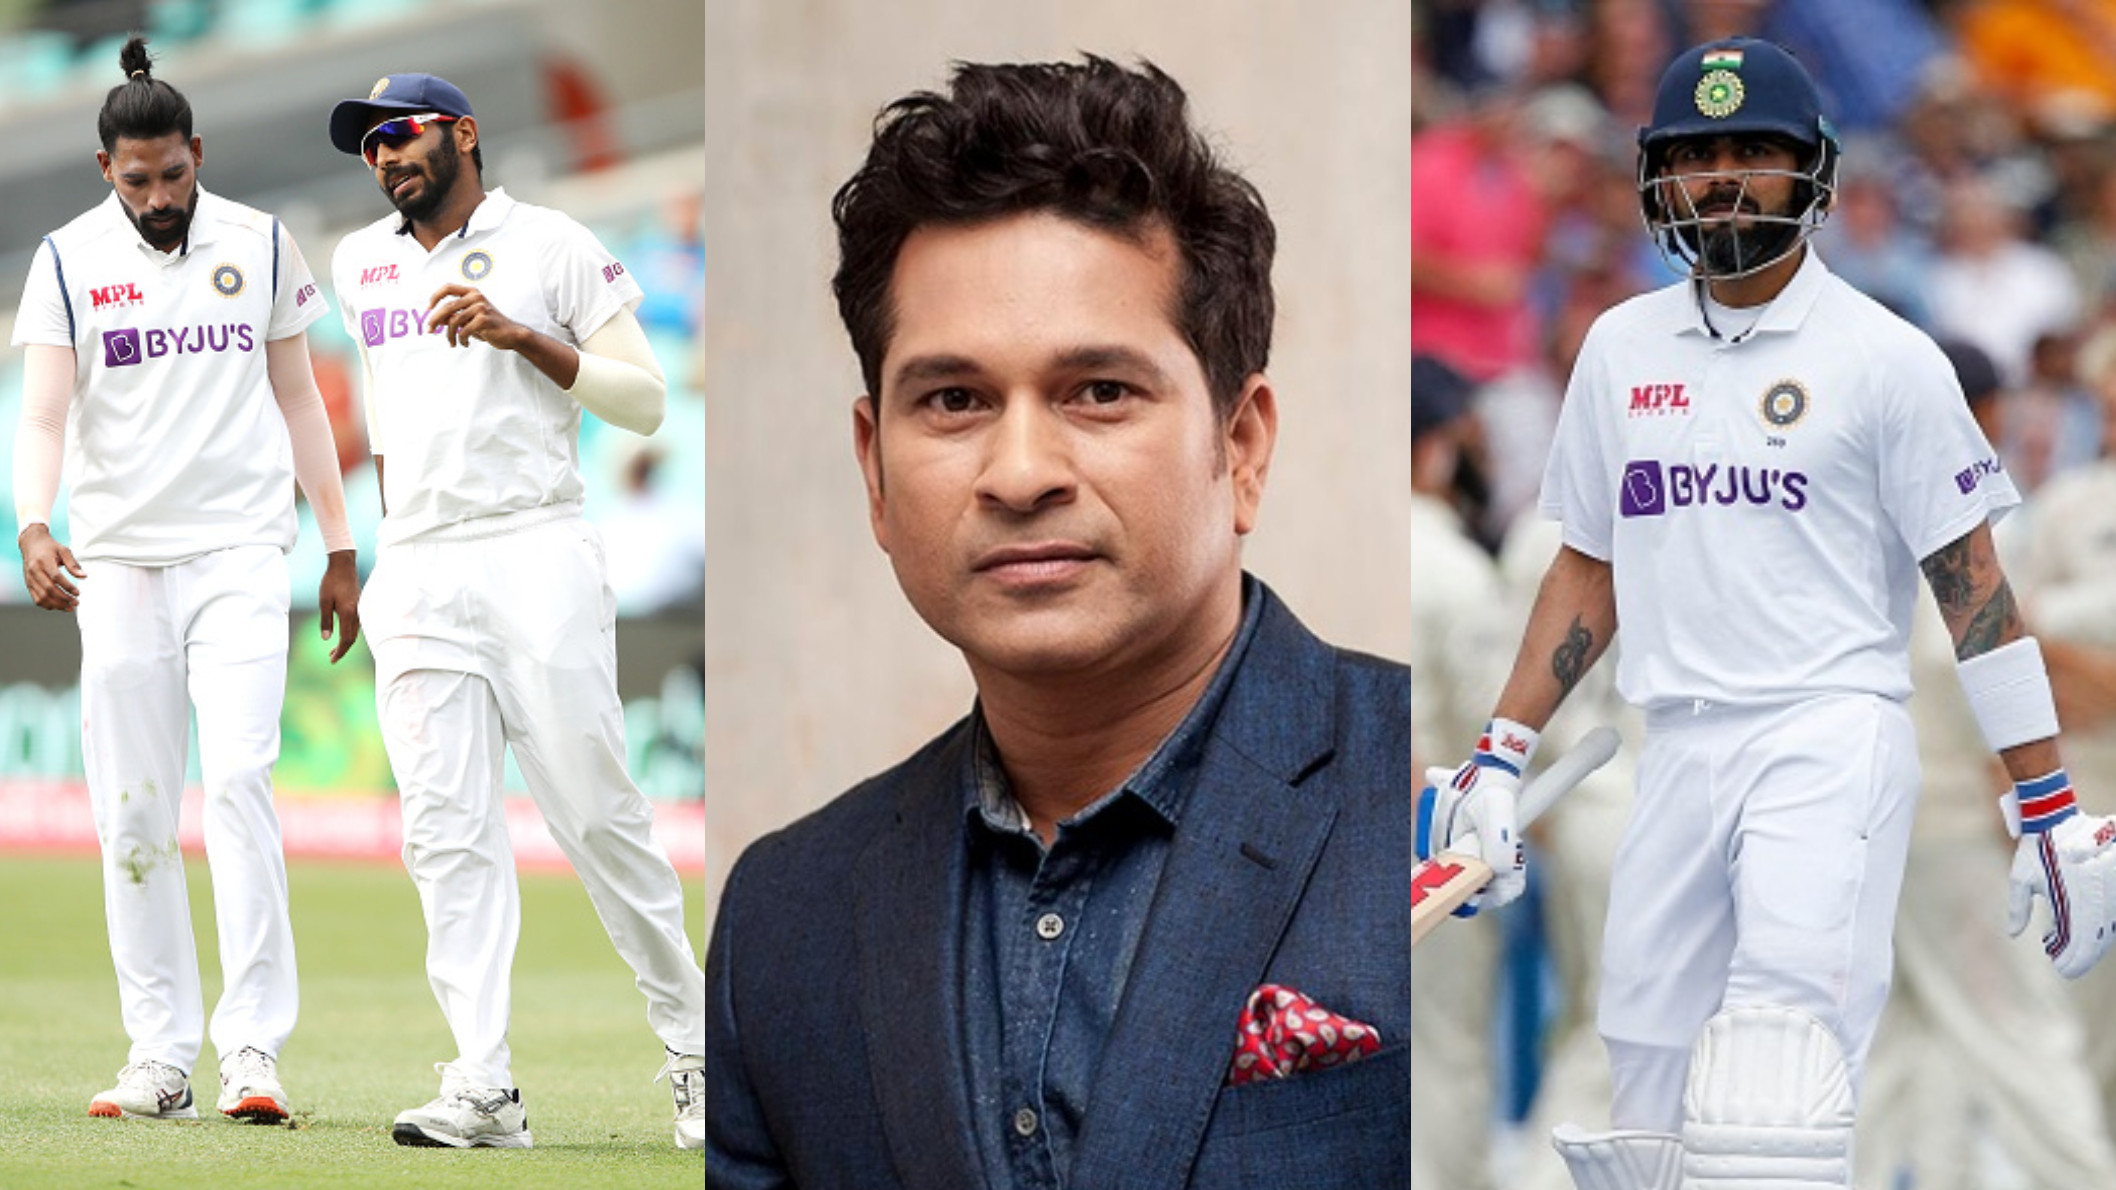 ENG v IND 2021: Tendulkar talks about Kohli’s poor run of form; praises Indian pacers after Lord’s Test win